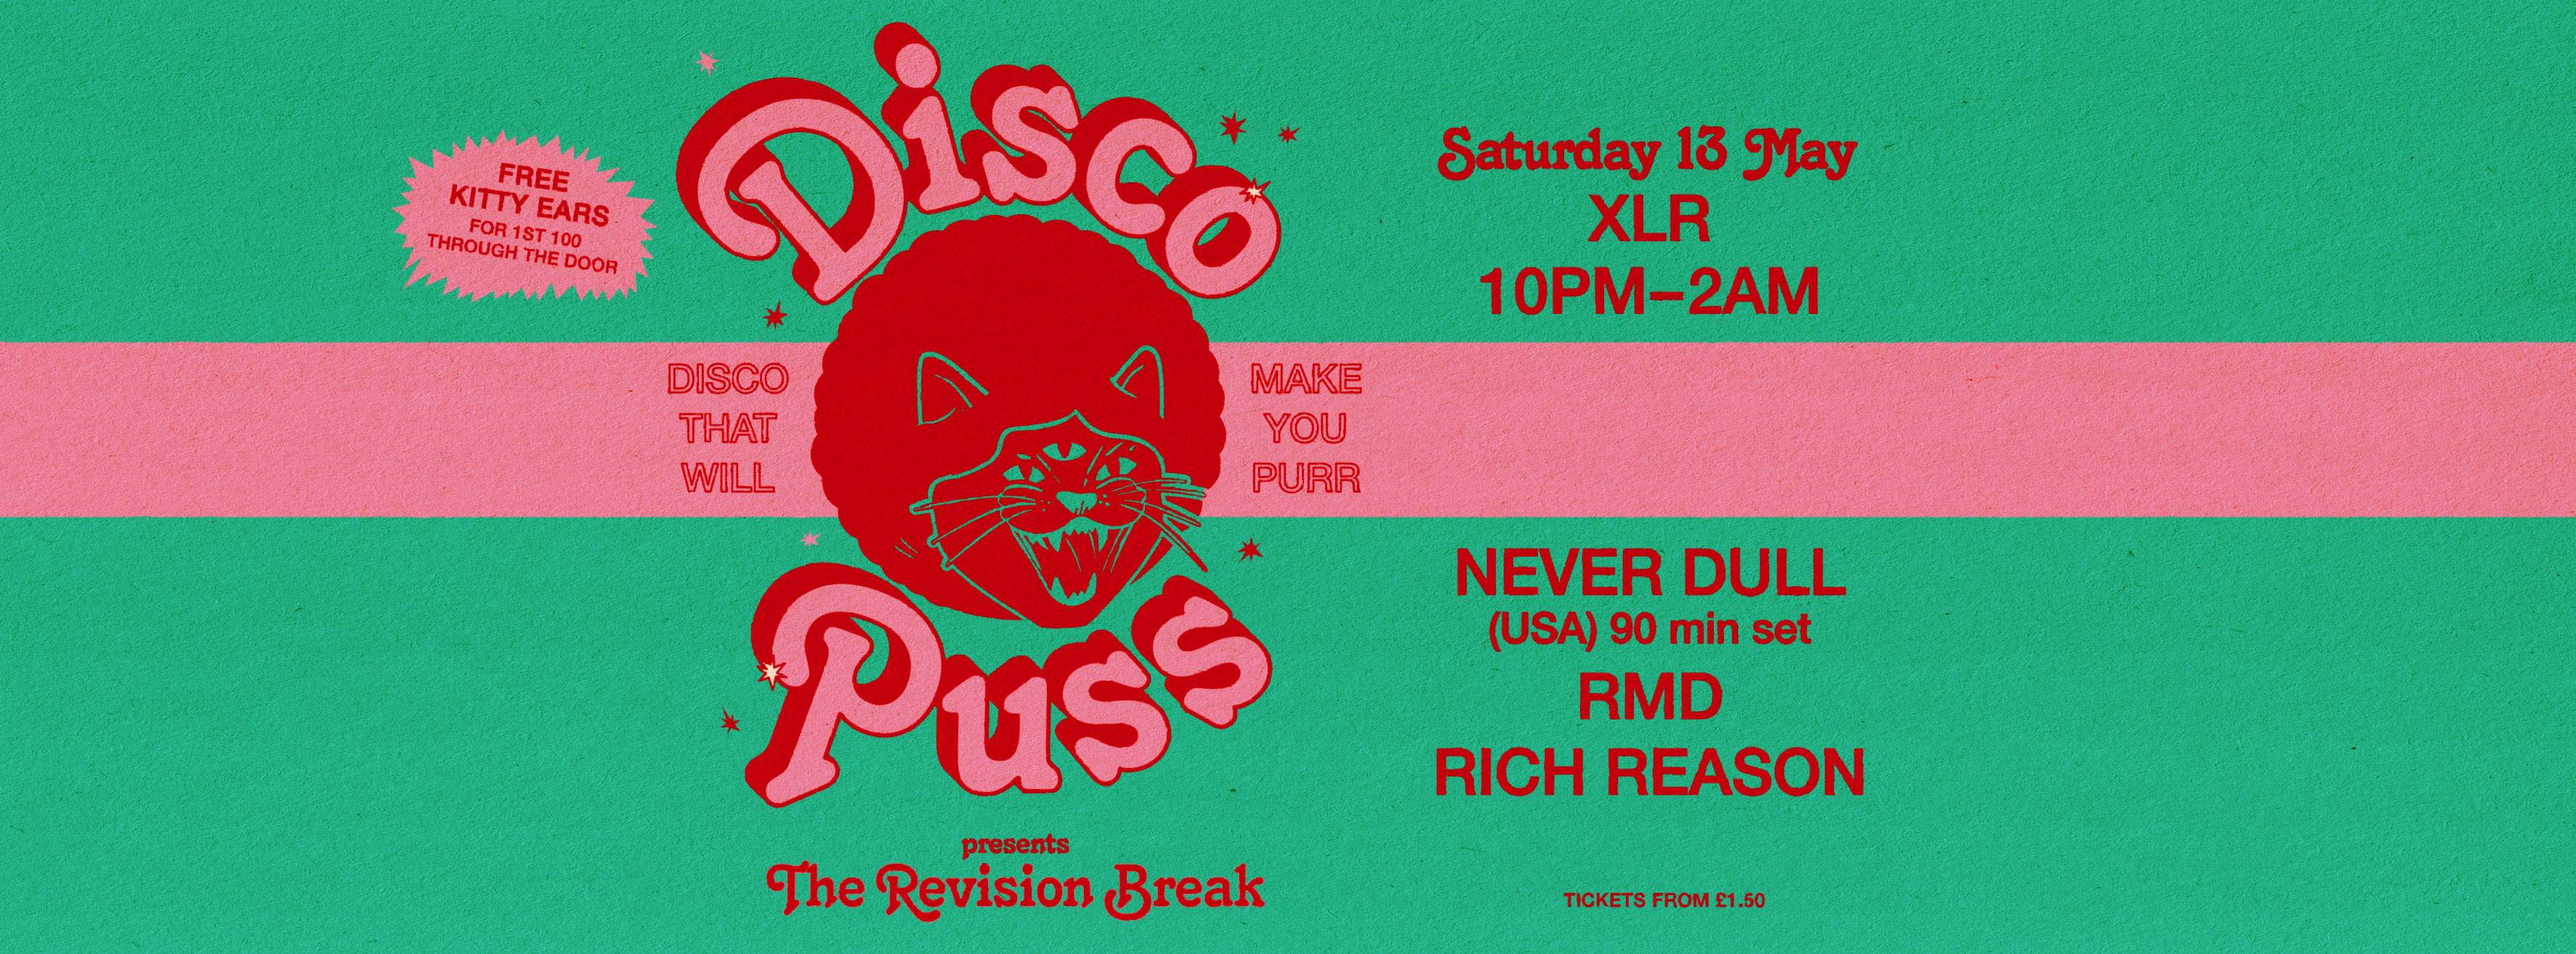 DISCO PUSS: The Revision Break with Never Dull - Página frontal